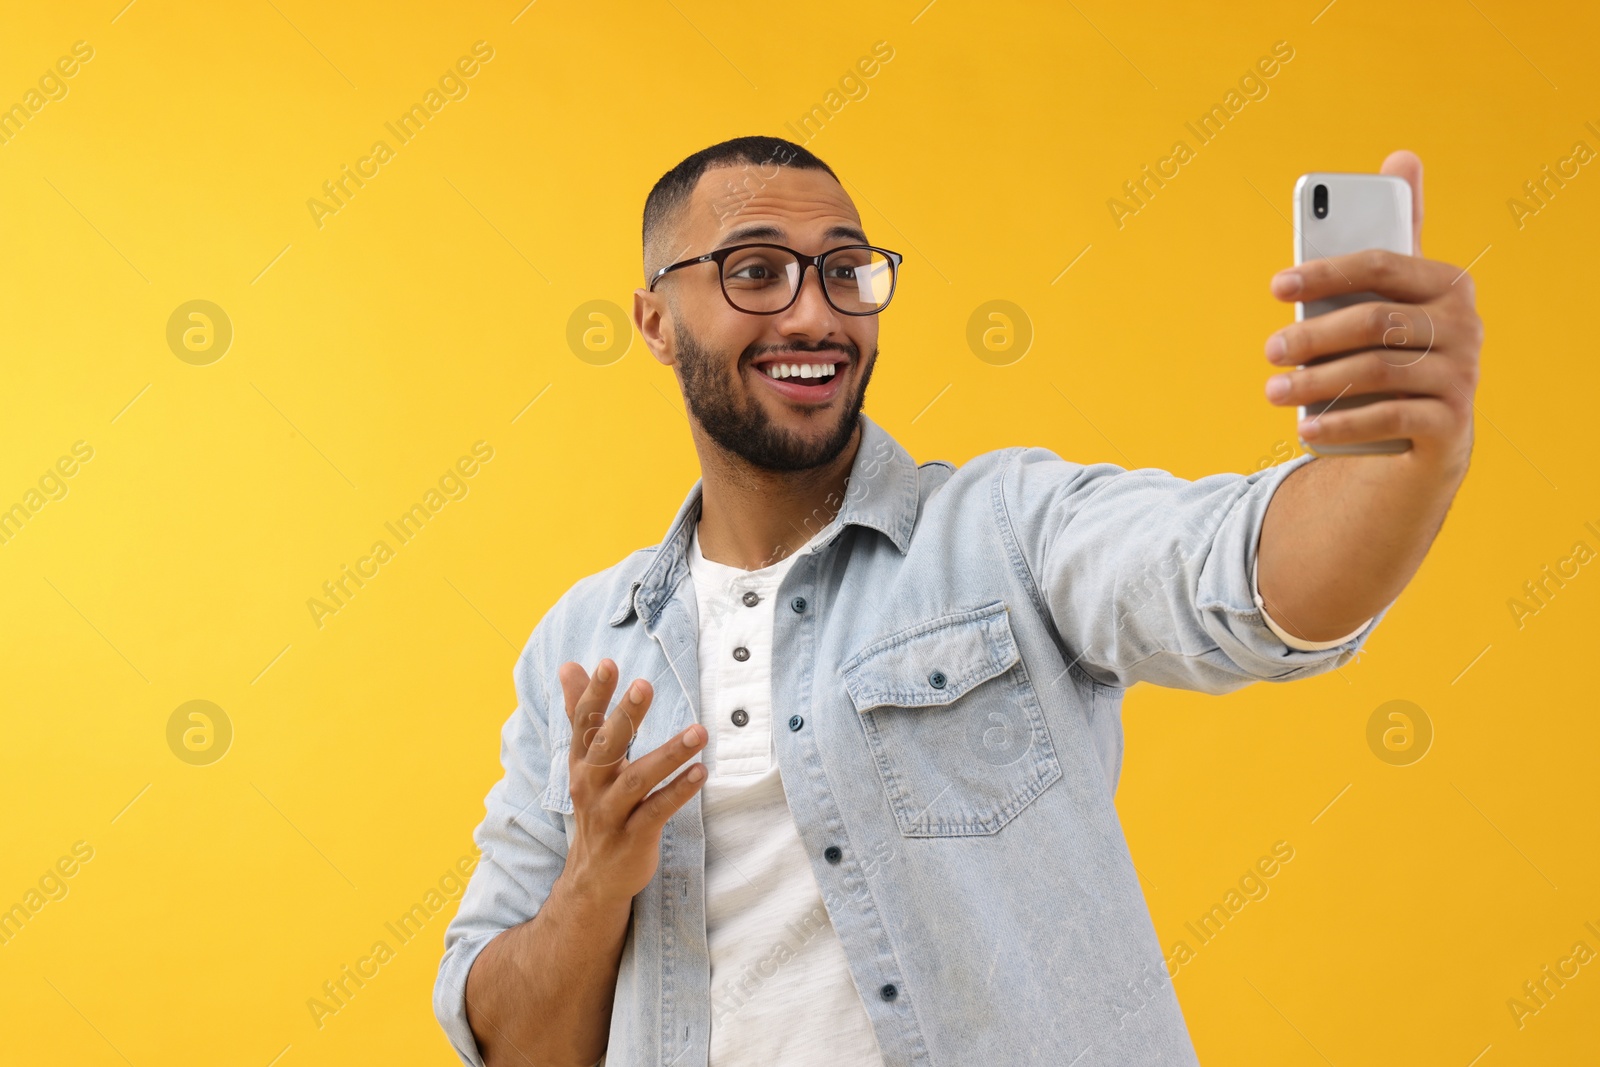 Photo of Smiling young man taking selfie with smartphone on yellow background